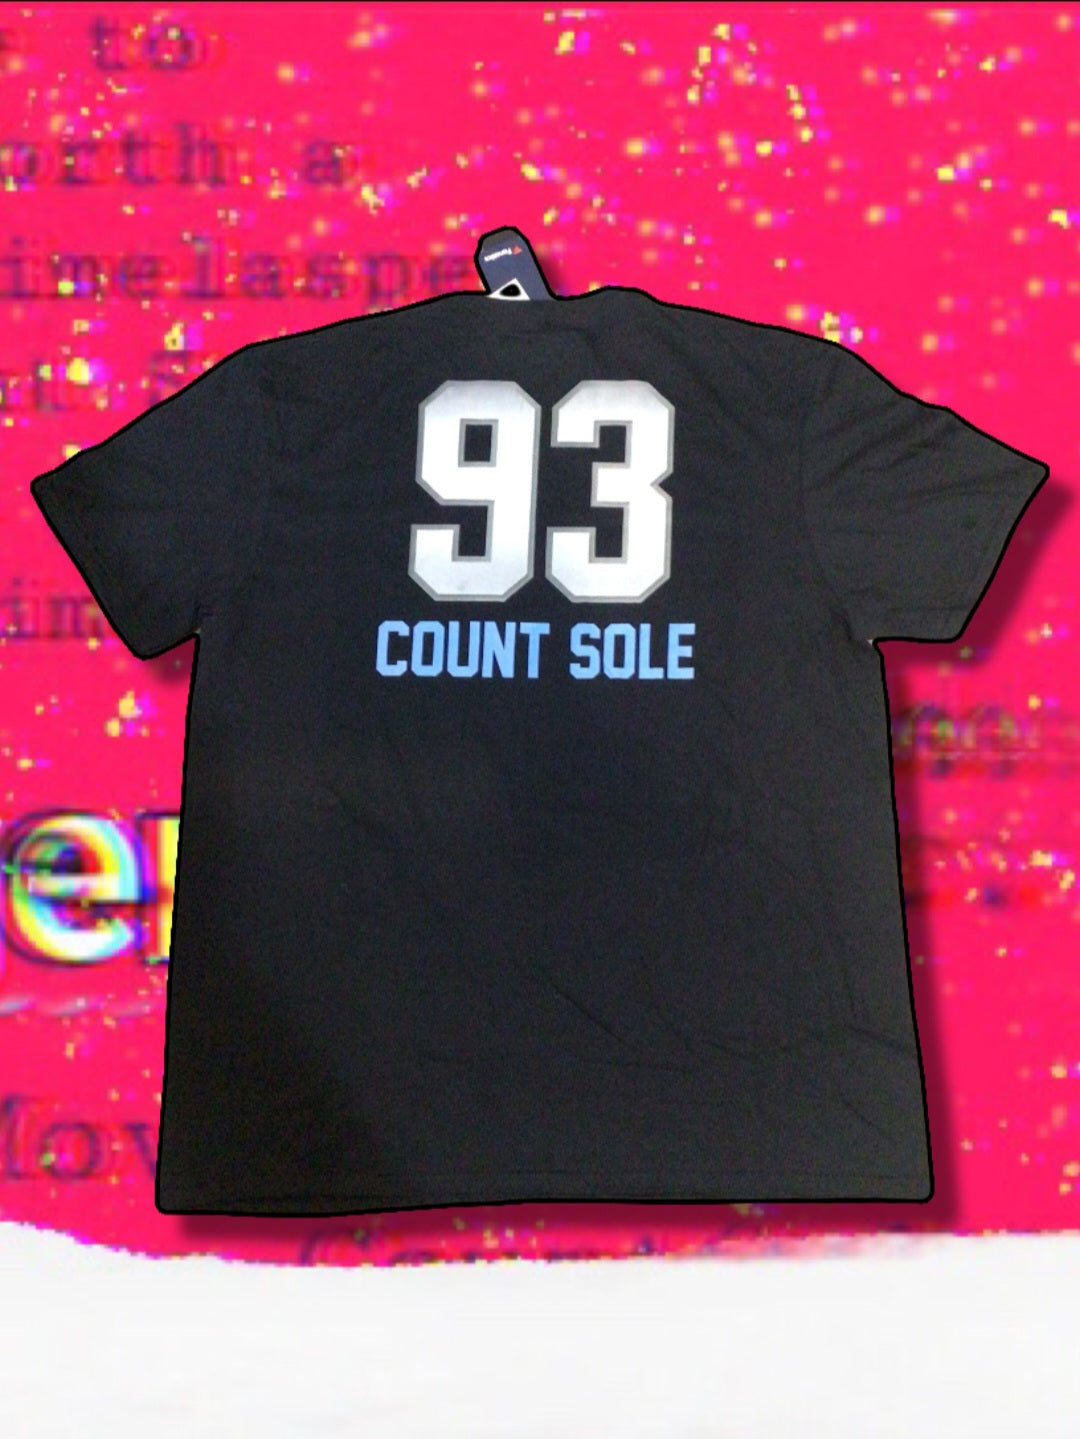 Count Sole x Tennessee Titans NFL Pro Line Tee size 2xl